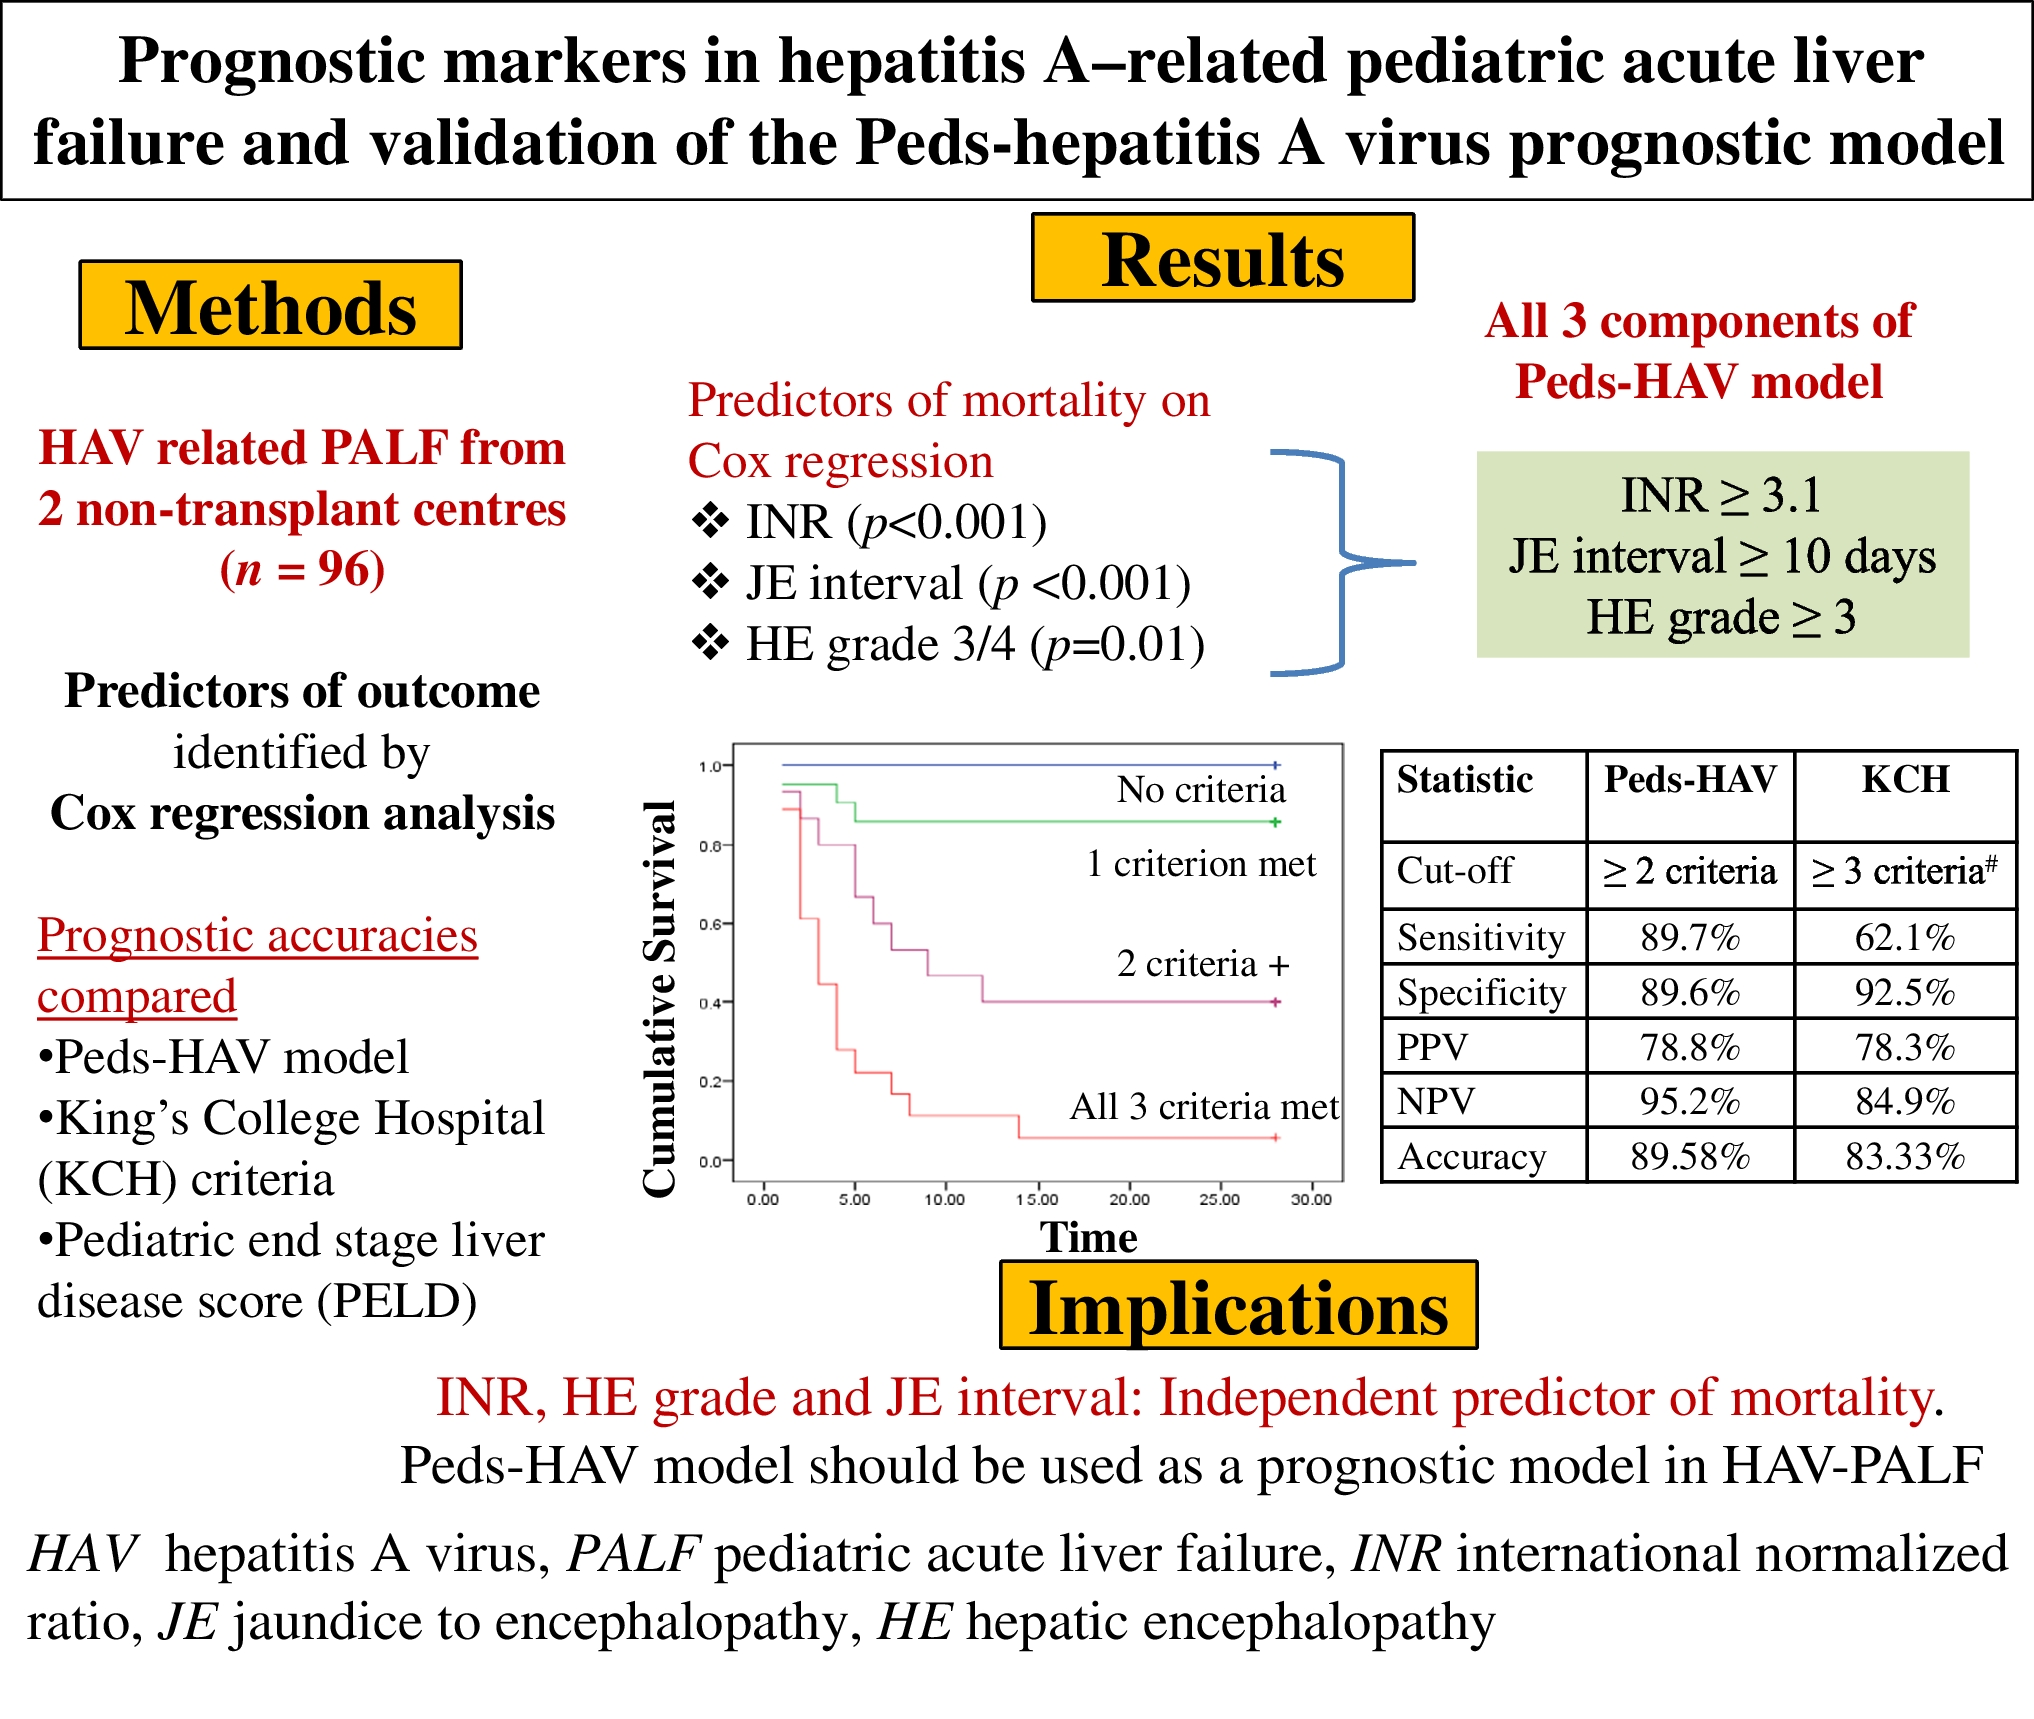 Prognostic markers in hepatitis A–related pediatric acute liver failure and validation of the Peds-hepatitis A virus prognostic model